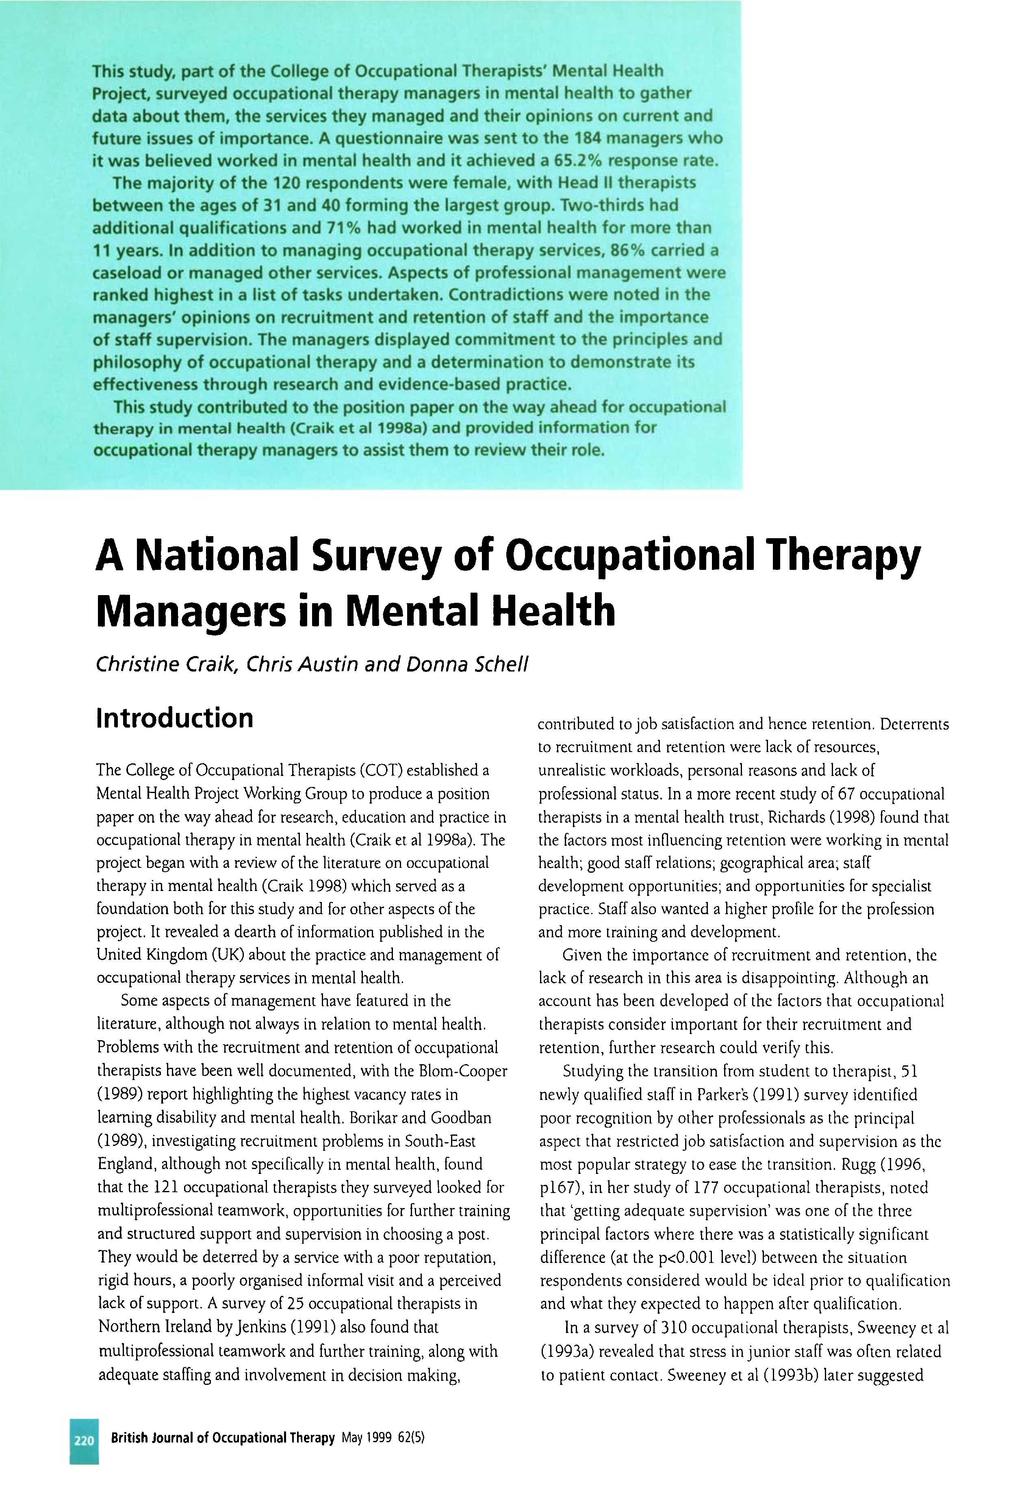 This study, part the College Occupational Therapists' Mental Health Project, surveyed occupational therapy managers in mental health to gather data about them.